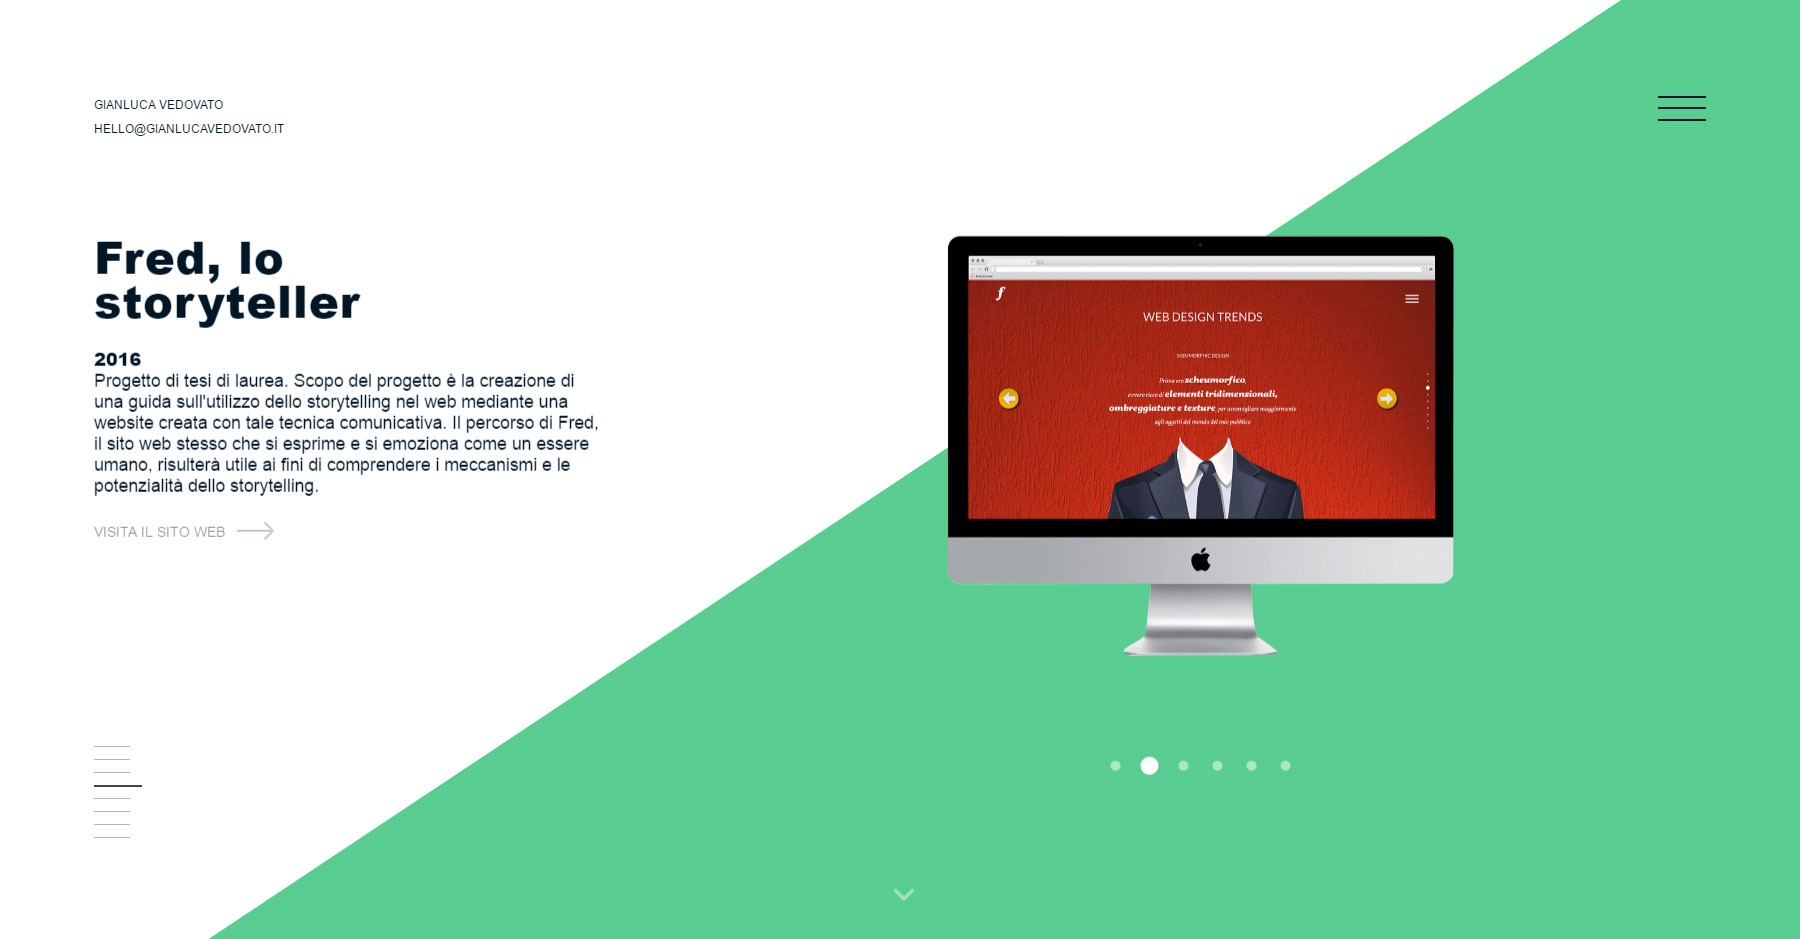 Gianluca Vedovato - Website of the Day